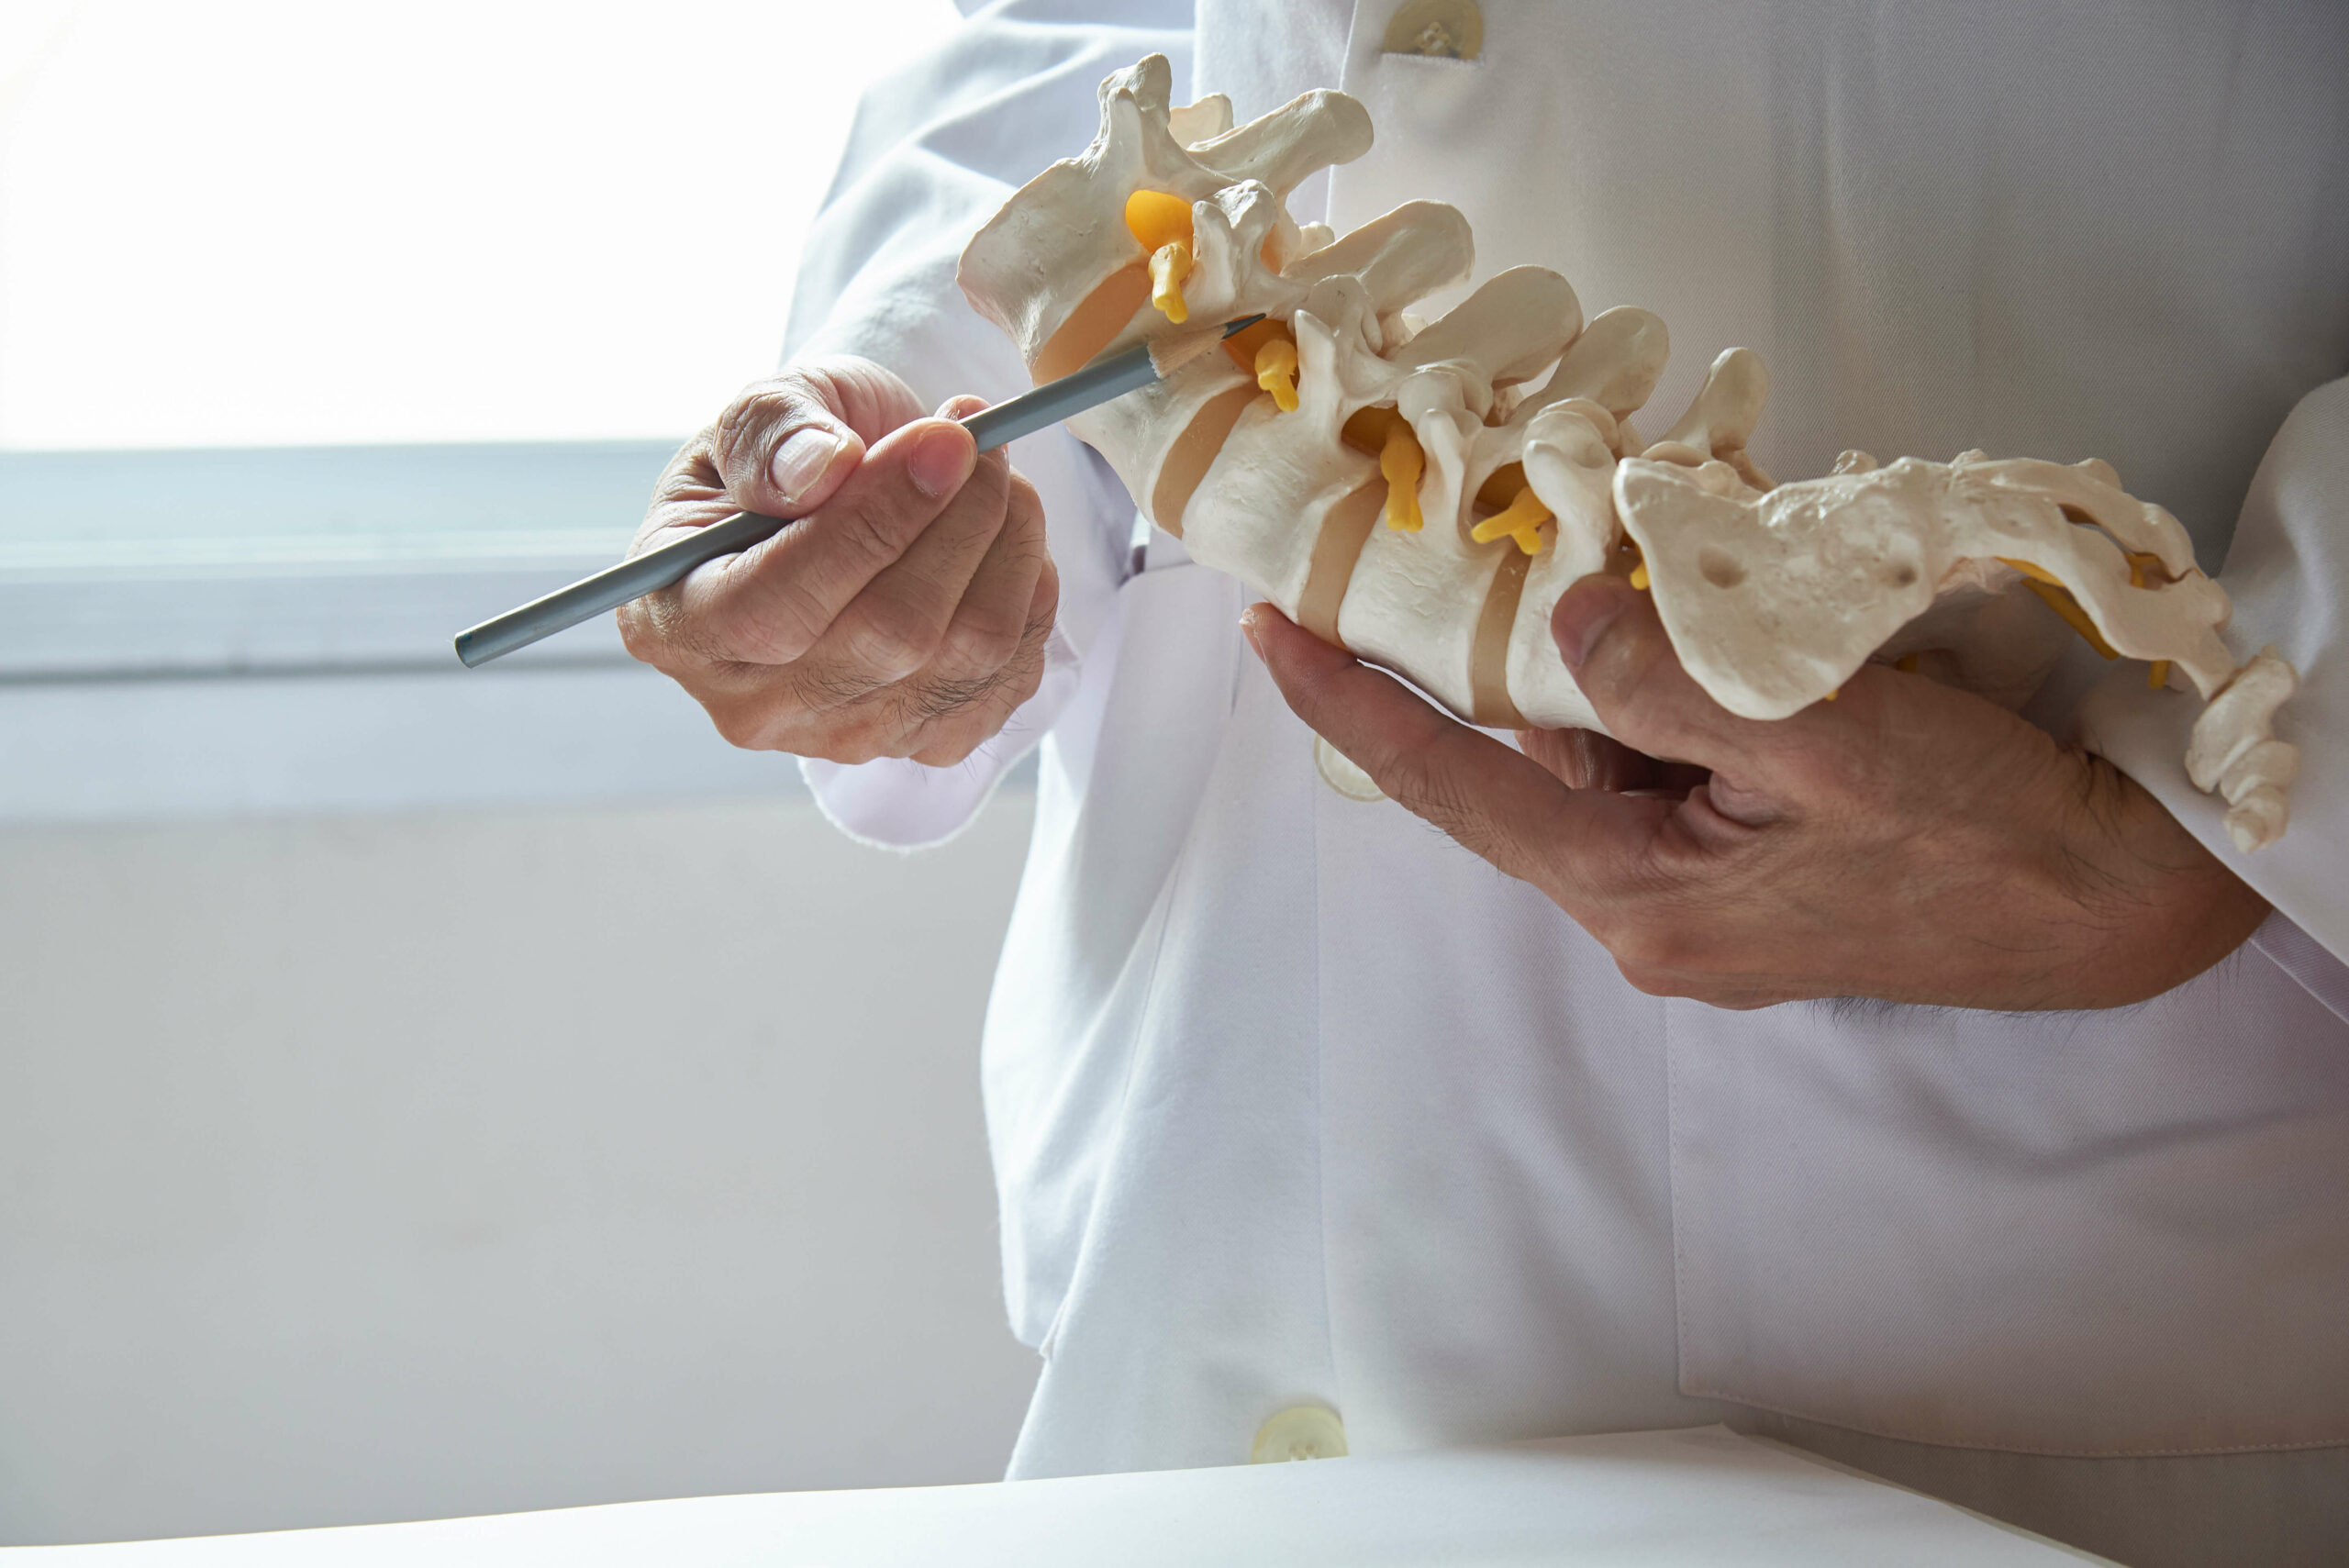 Physician holding a spine model